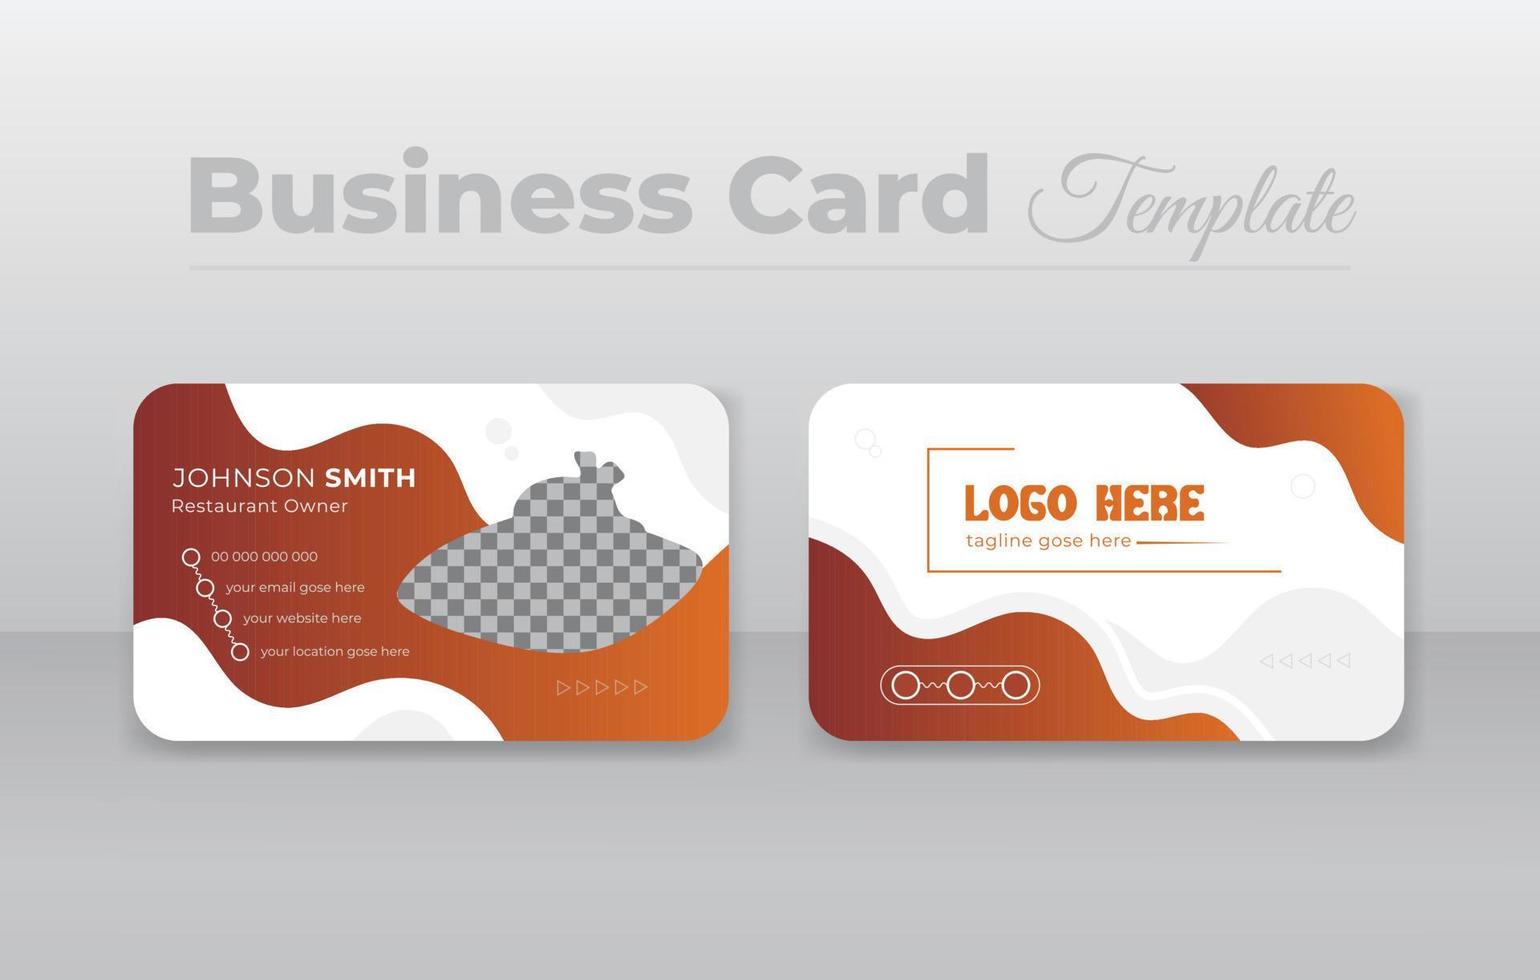 Modern chicken business card design template or vector illustration layout